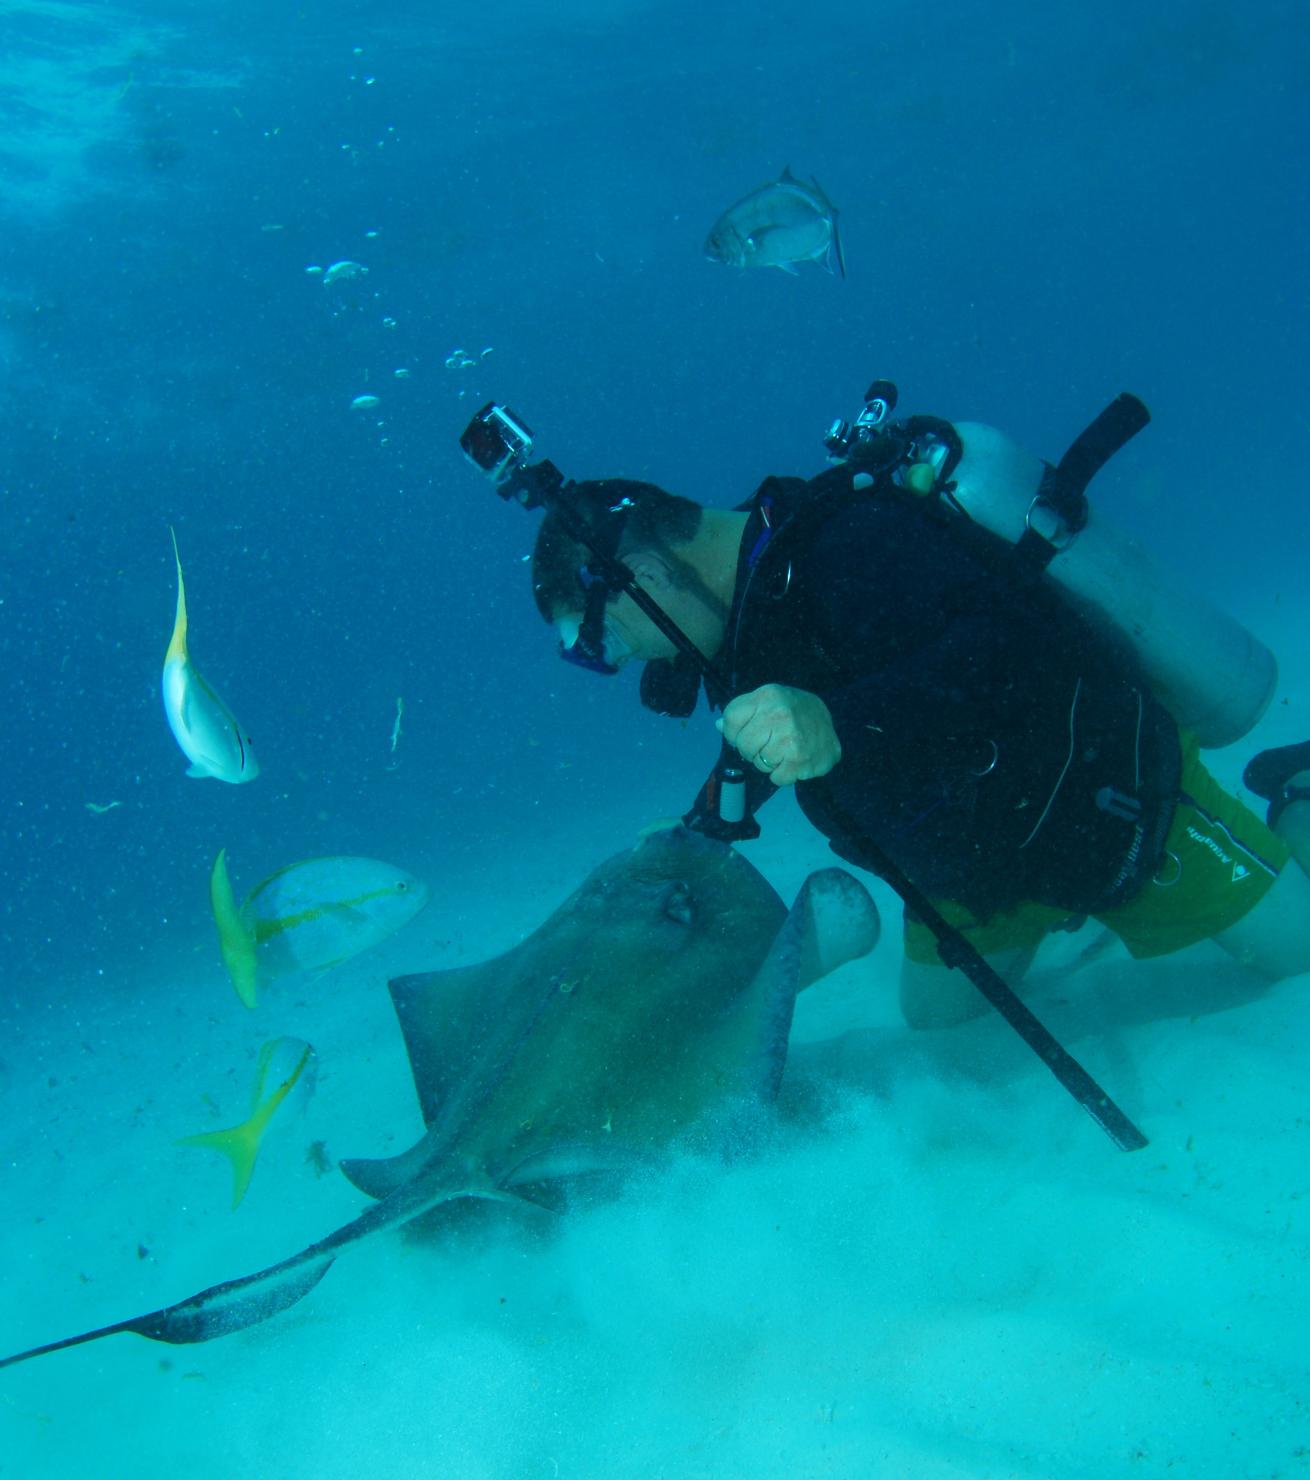 stingray and diver underwater 